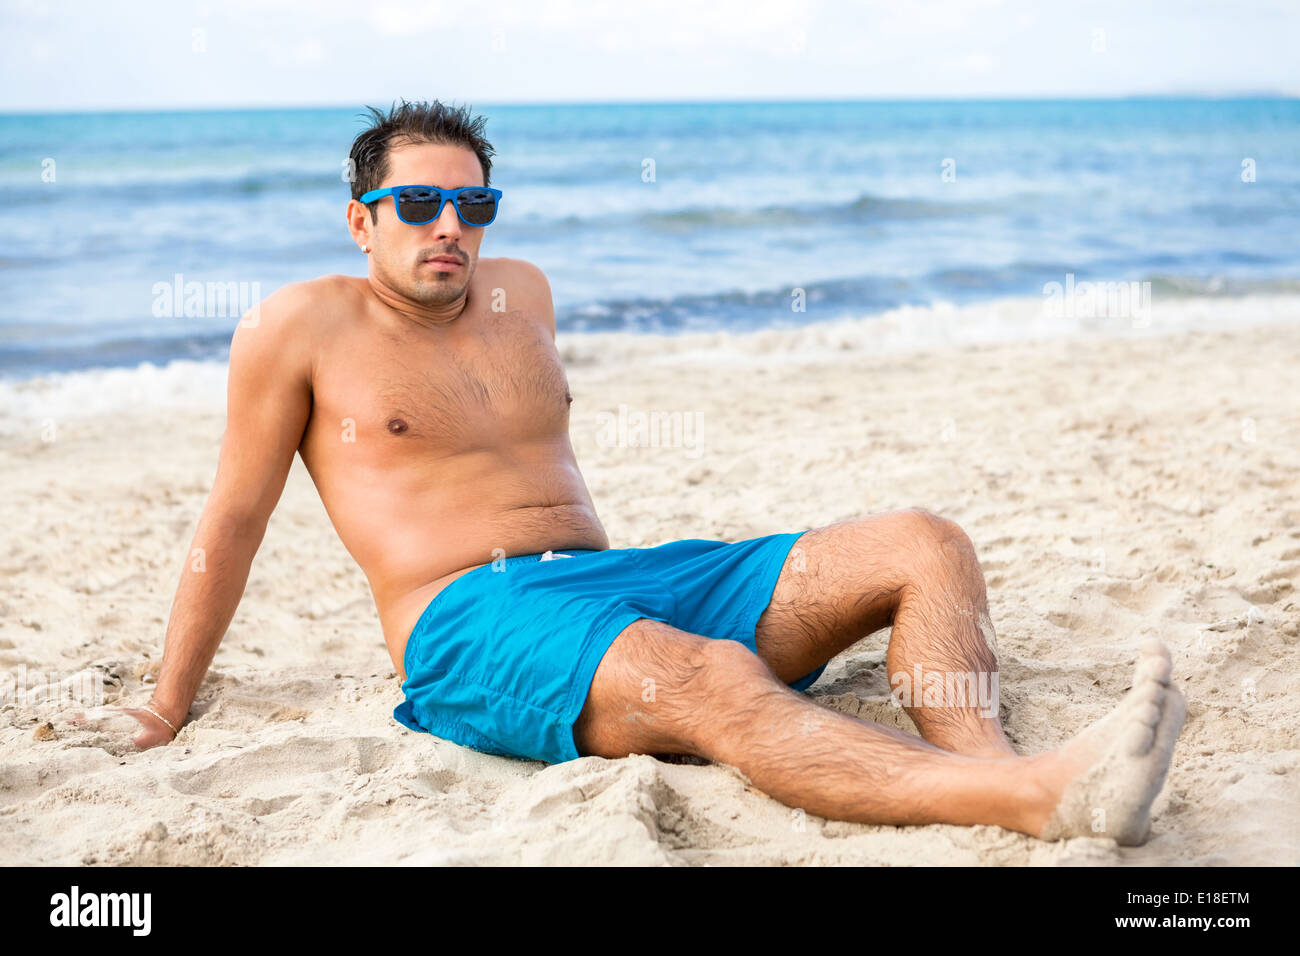 Handsome man wearing trendy sunglasses and his swimsuit relaxing